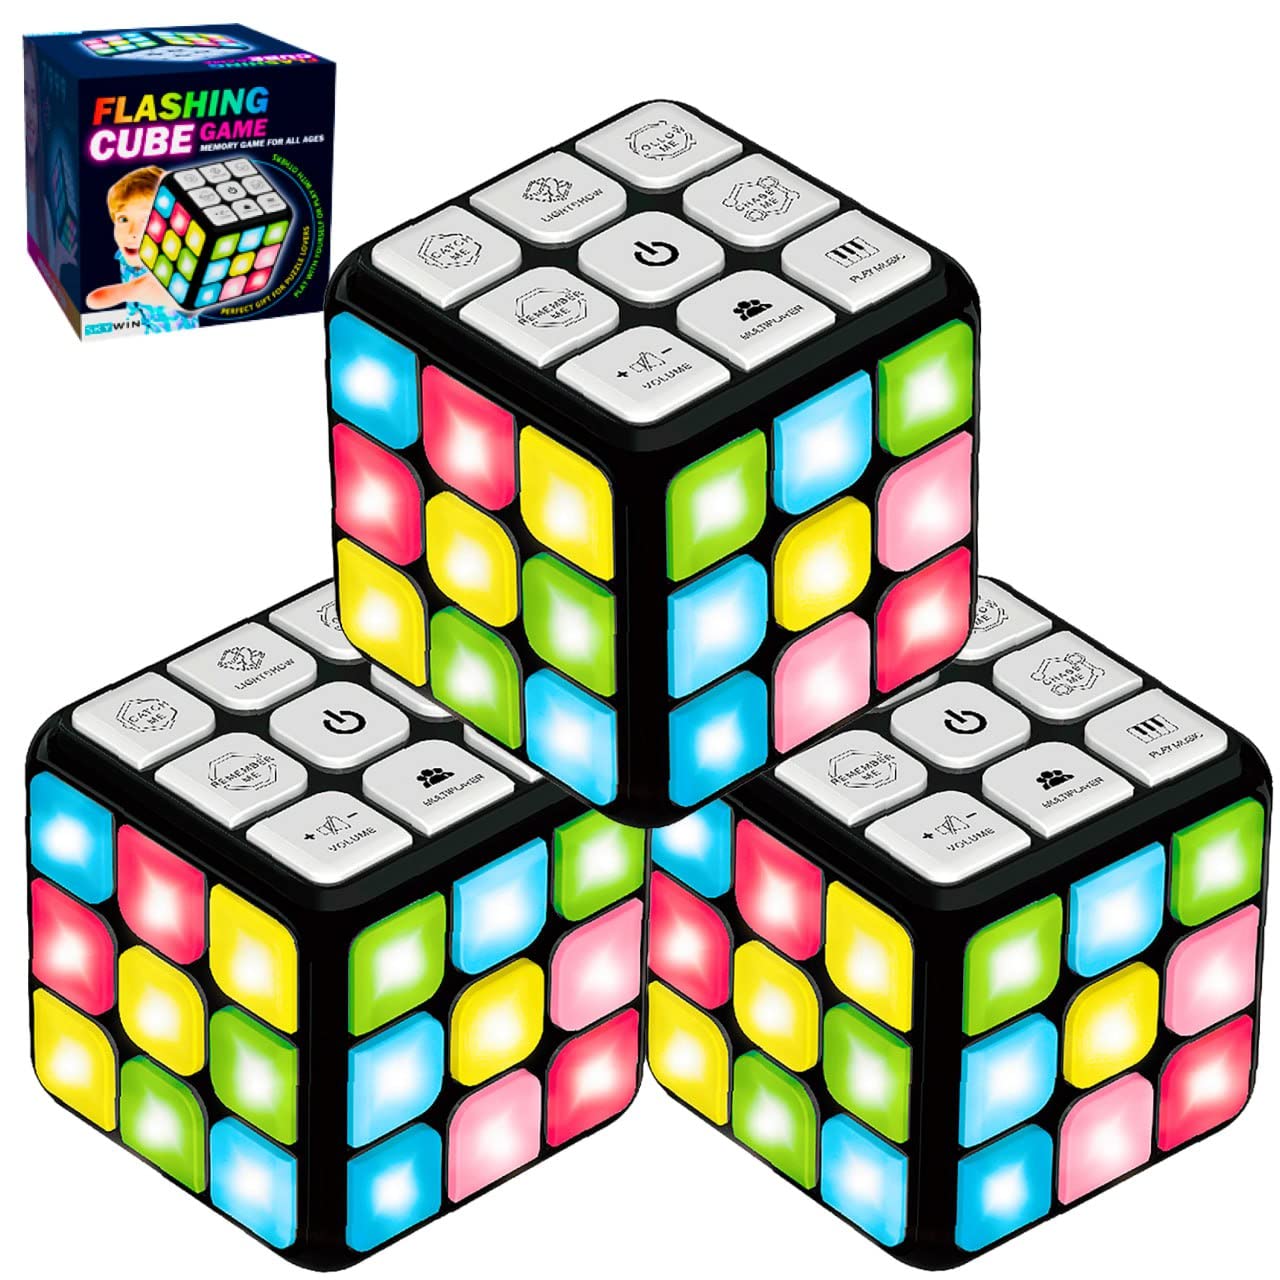 Skywin Puzzle STEM Cube Game - 3 Pack Entertaining Fun Unique Flashing Cube Electronic Memory Speed Game Development for